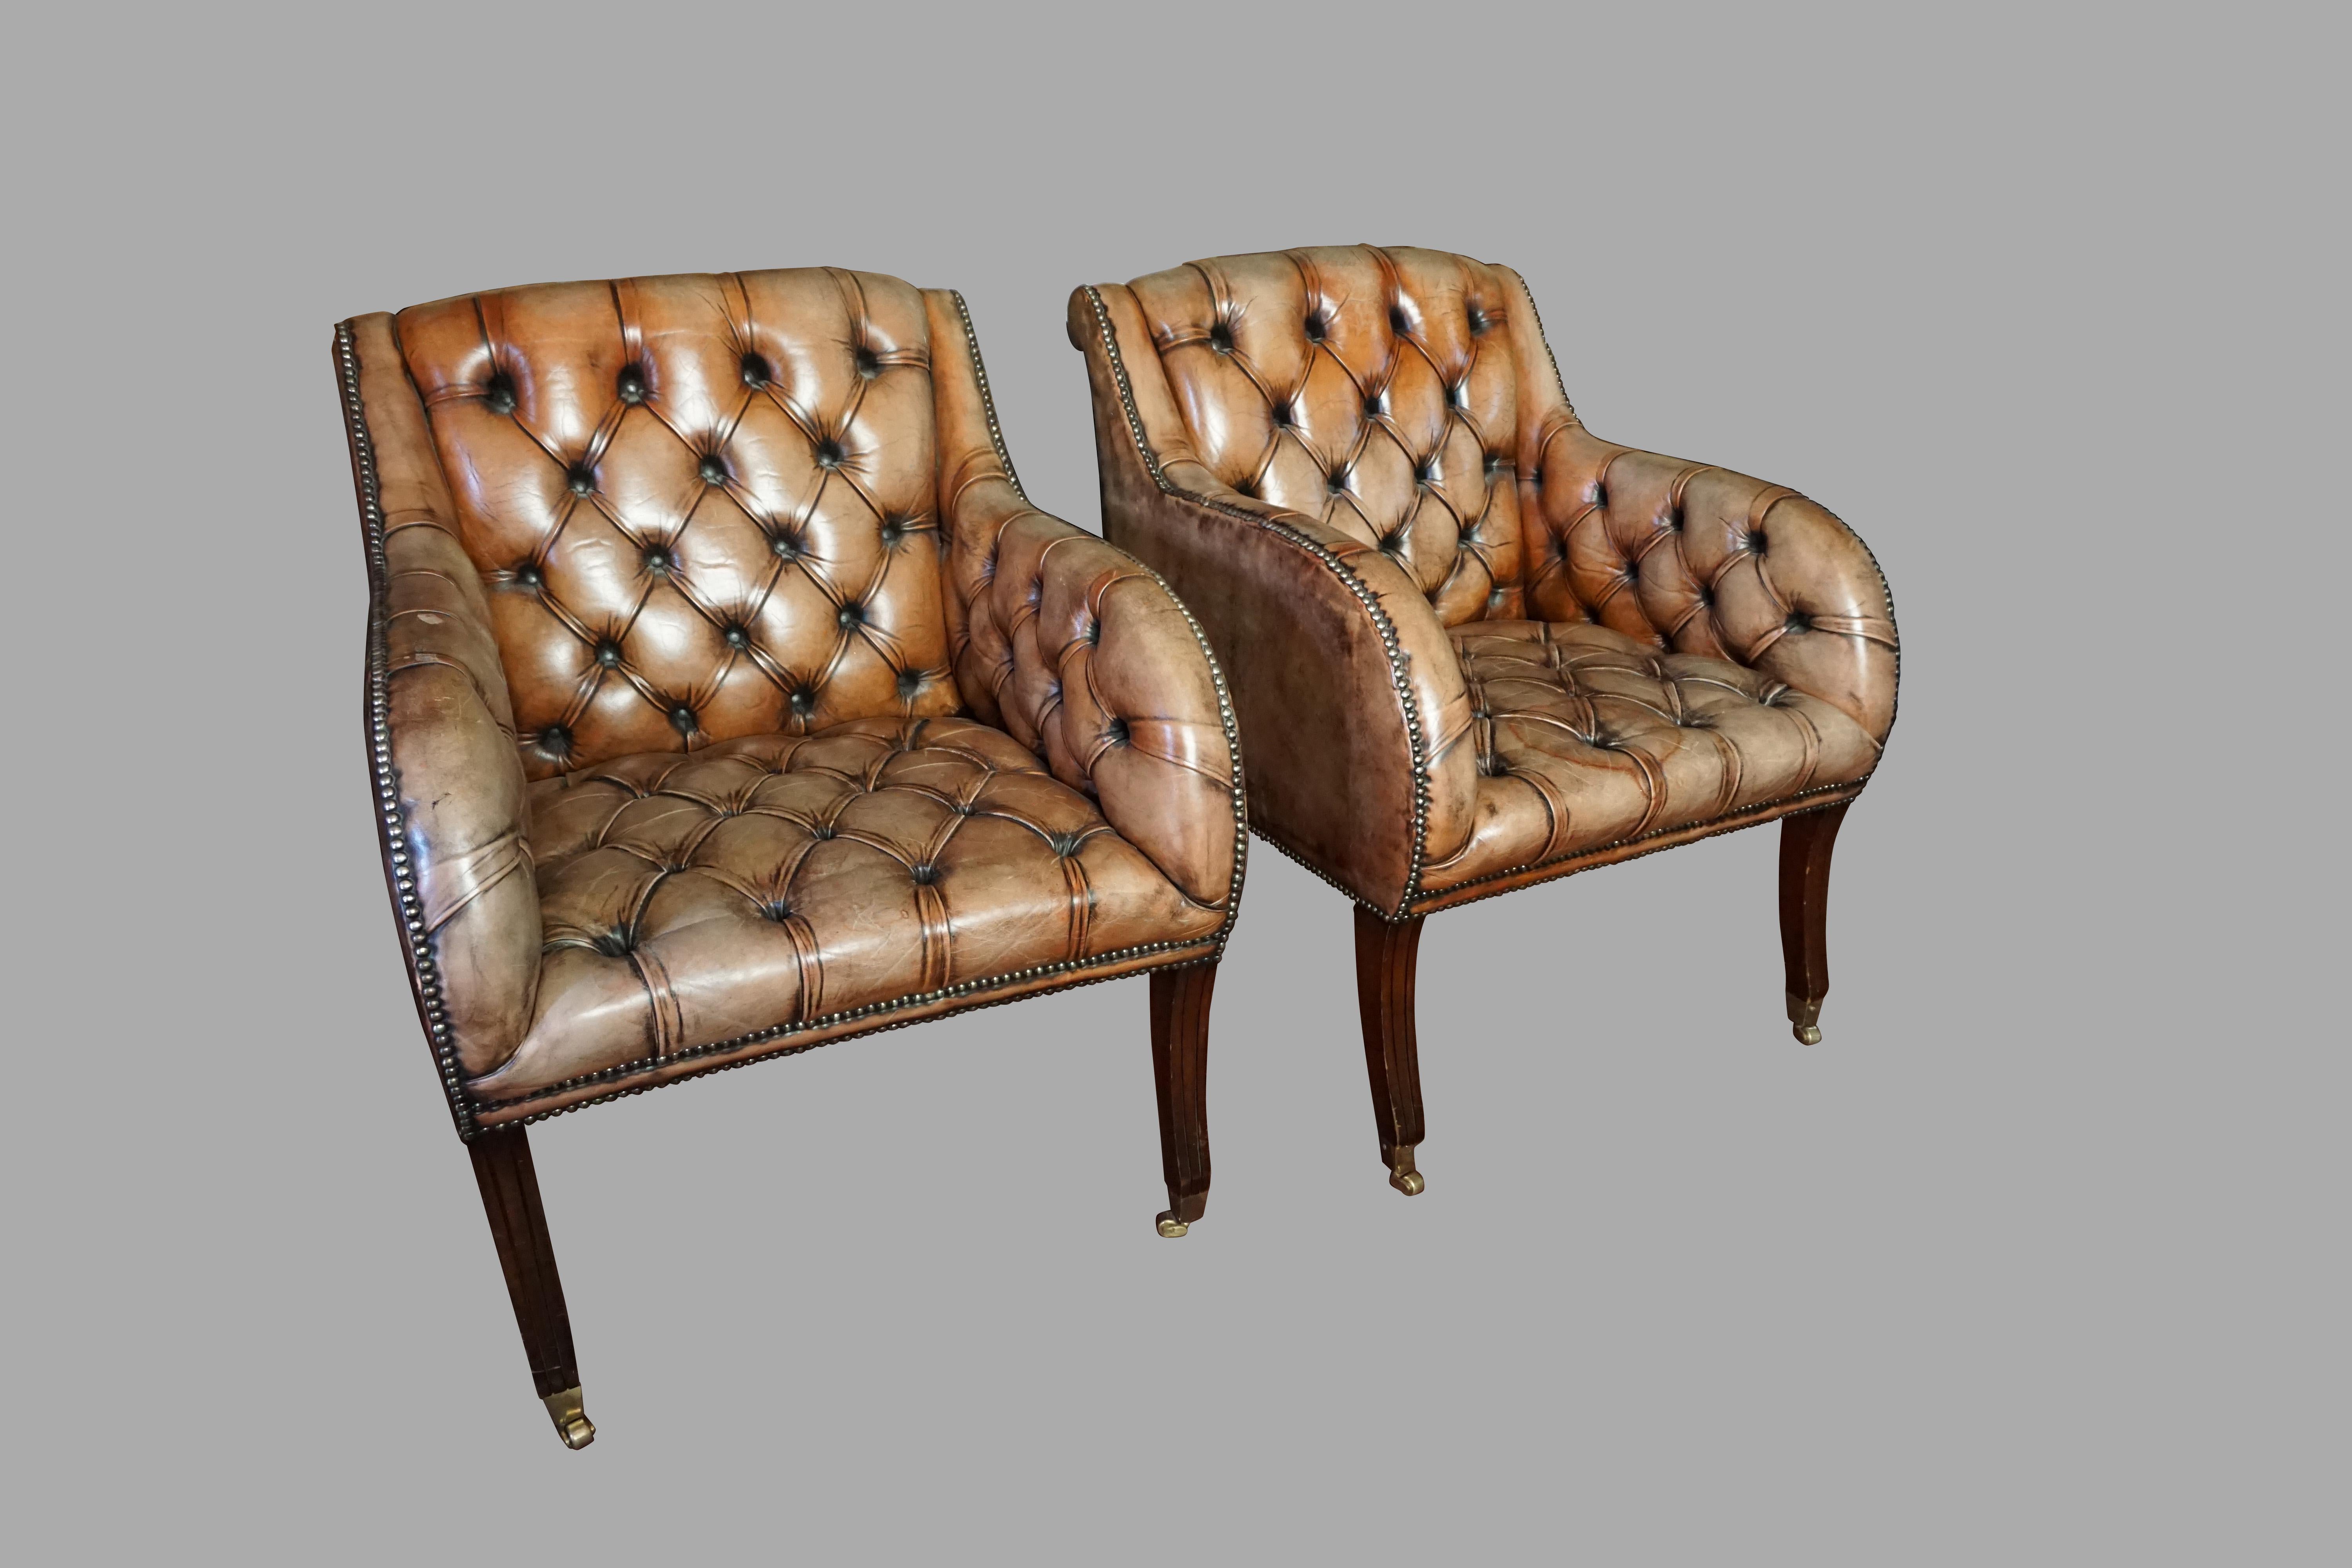 A comfortable pair of English tufted leather upholstered armchairs of ample proportions, with rolled leather arms, finished overall in nailhead trim. The chairs rest on molded mahogany saber legs with front brass box casters, 20th century.